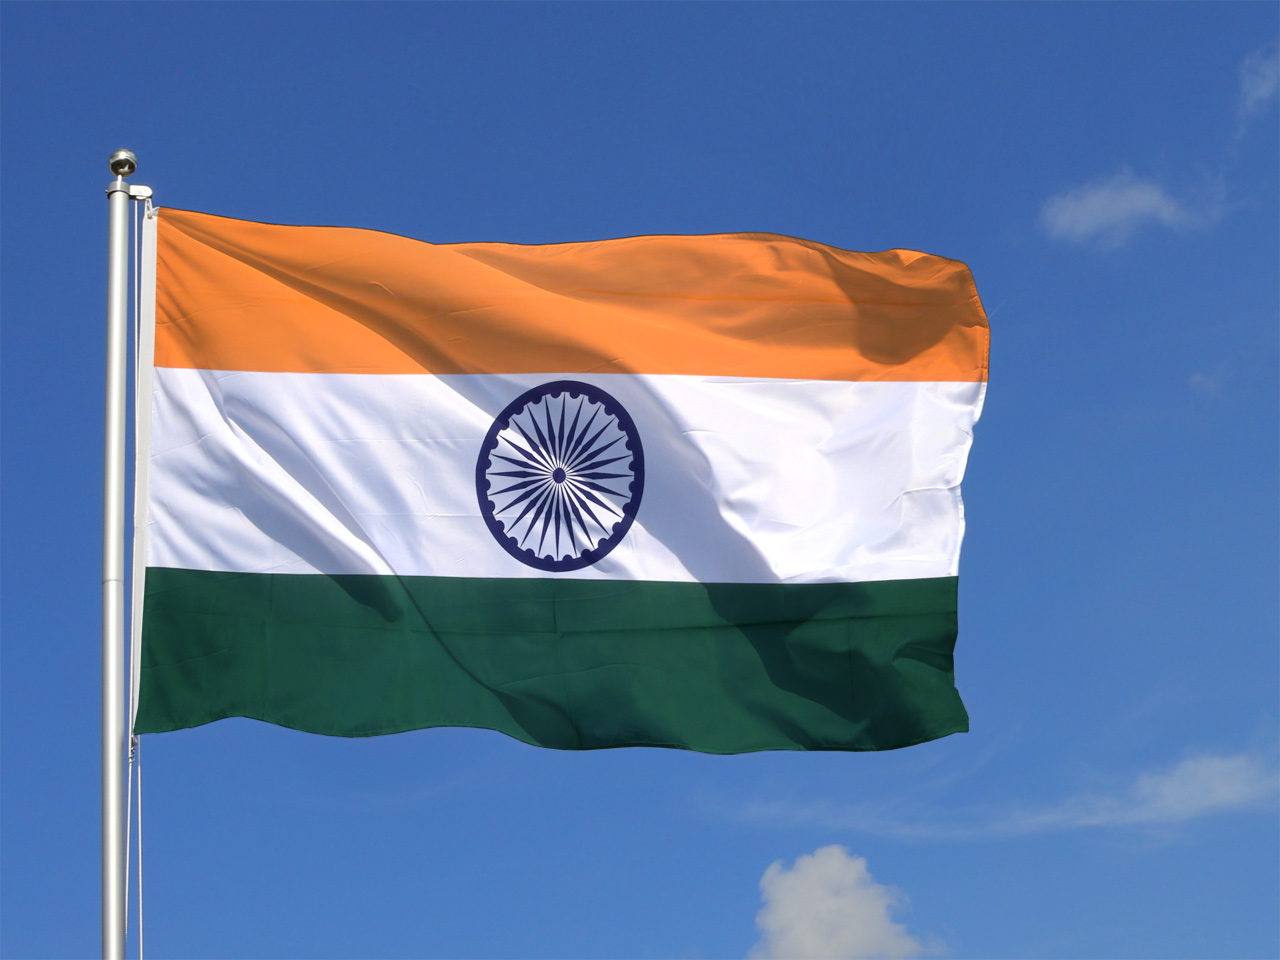 Astonishing Compilation: Full 4K Collection of Indian Flag Images for WhatsApp Profile Download, Featuring Top 999+ Choices